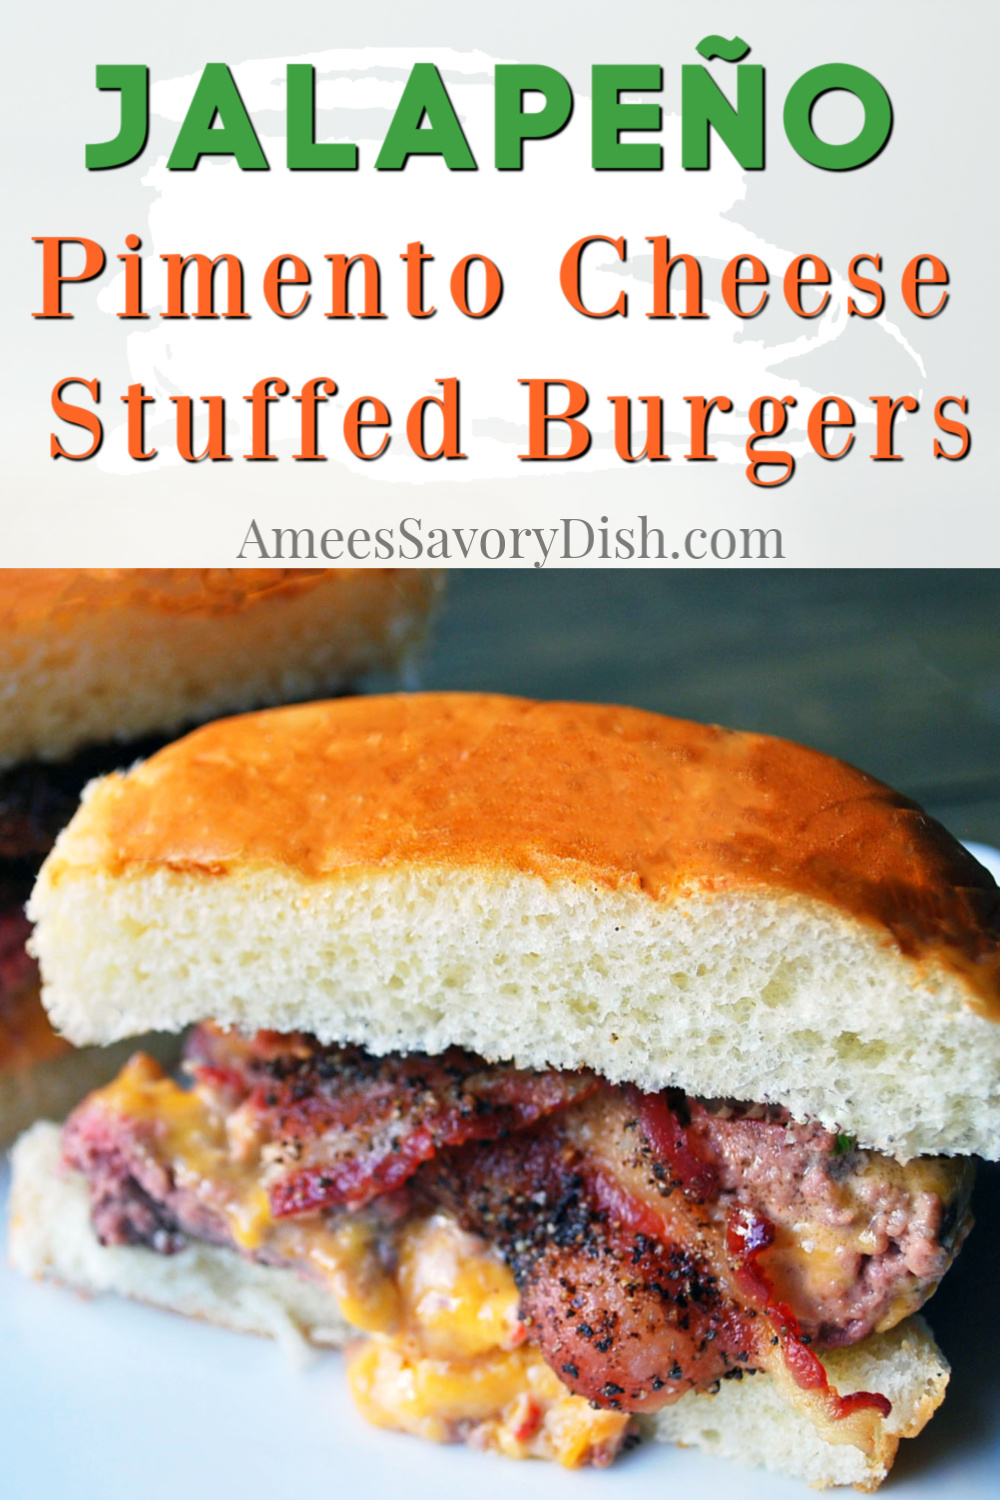 A mouthwatering recipe for stuffed burgers made with ground sirloin beef and stuffed with southern-style spicy pimento cheese.   These epic burgers will be the star of your next cookout! #stuffedburgers #burgerrecipe #pimentocheese #epicburgers #burgers #beef via @Ameessavorydish